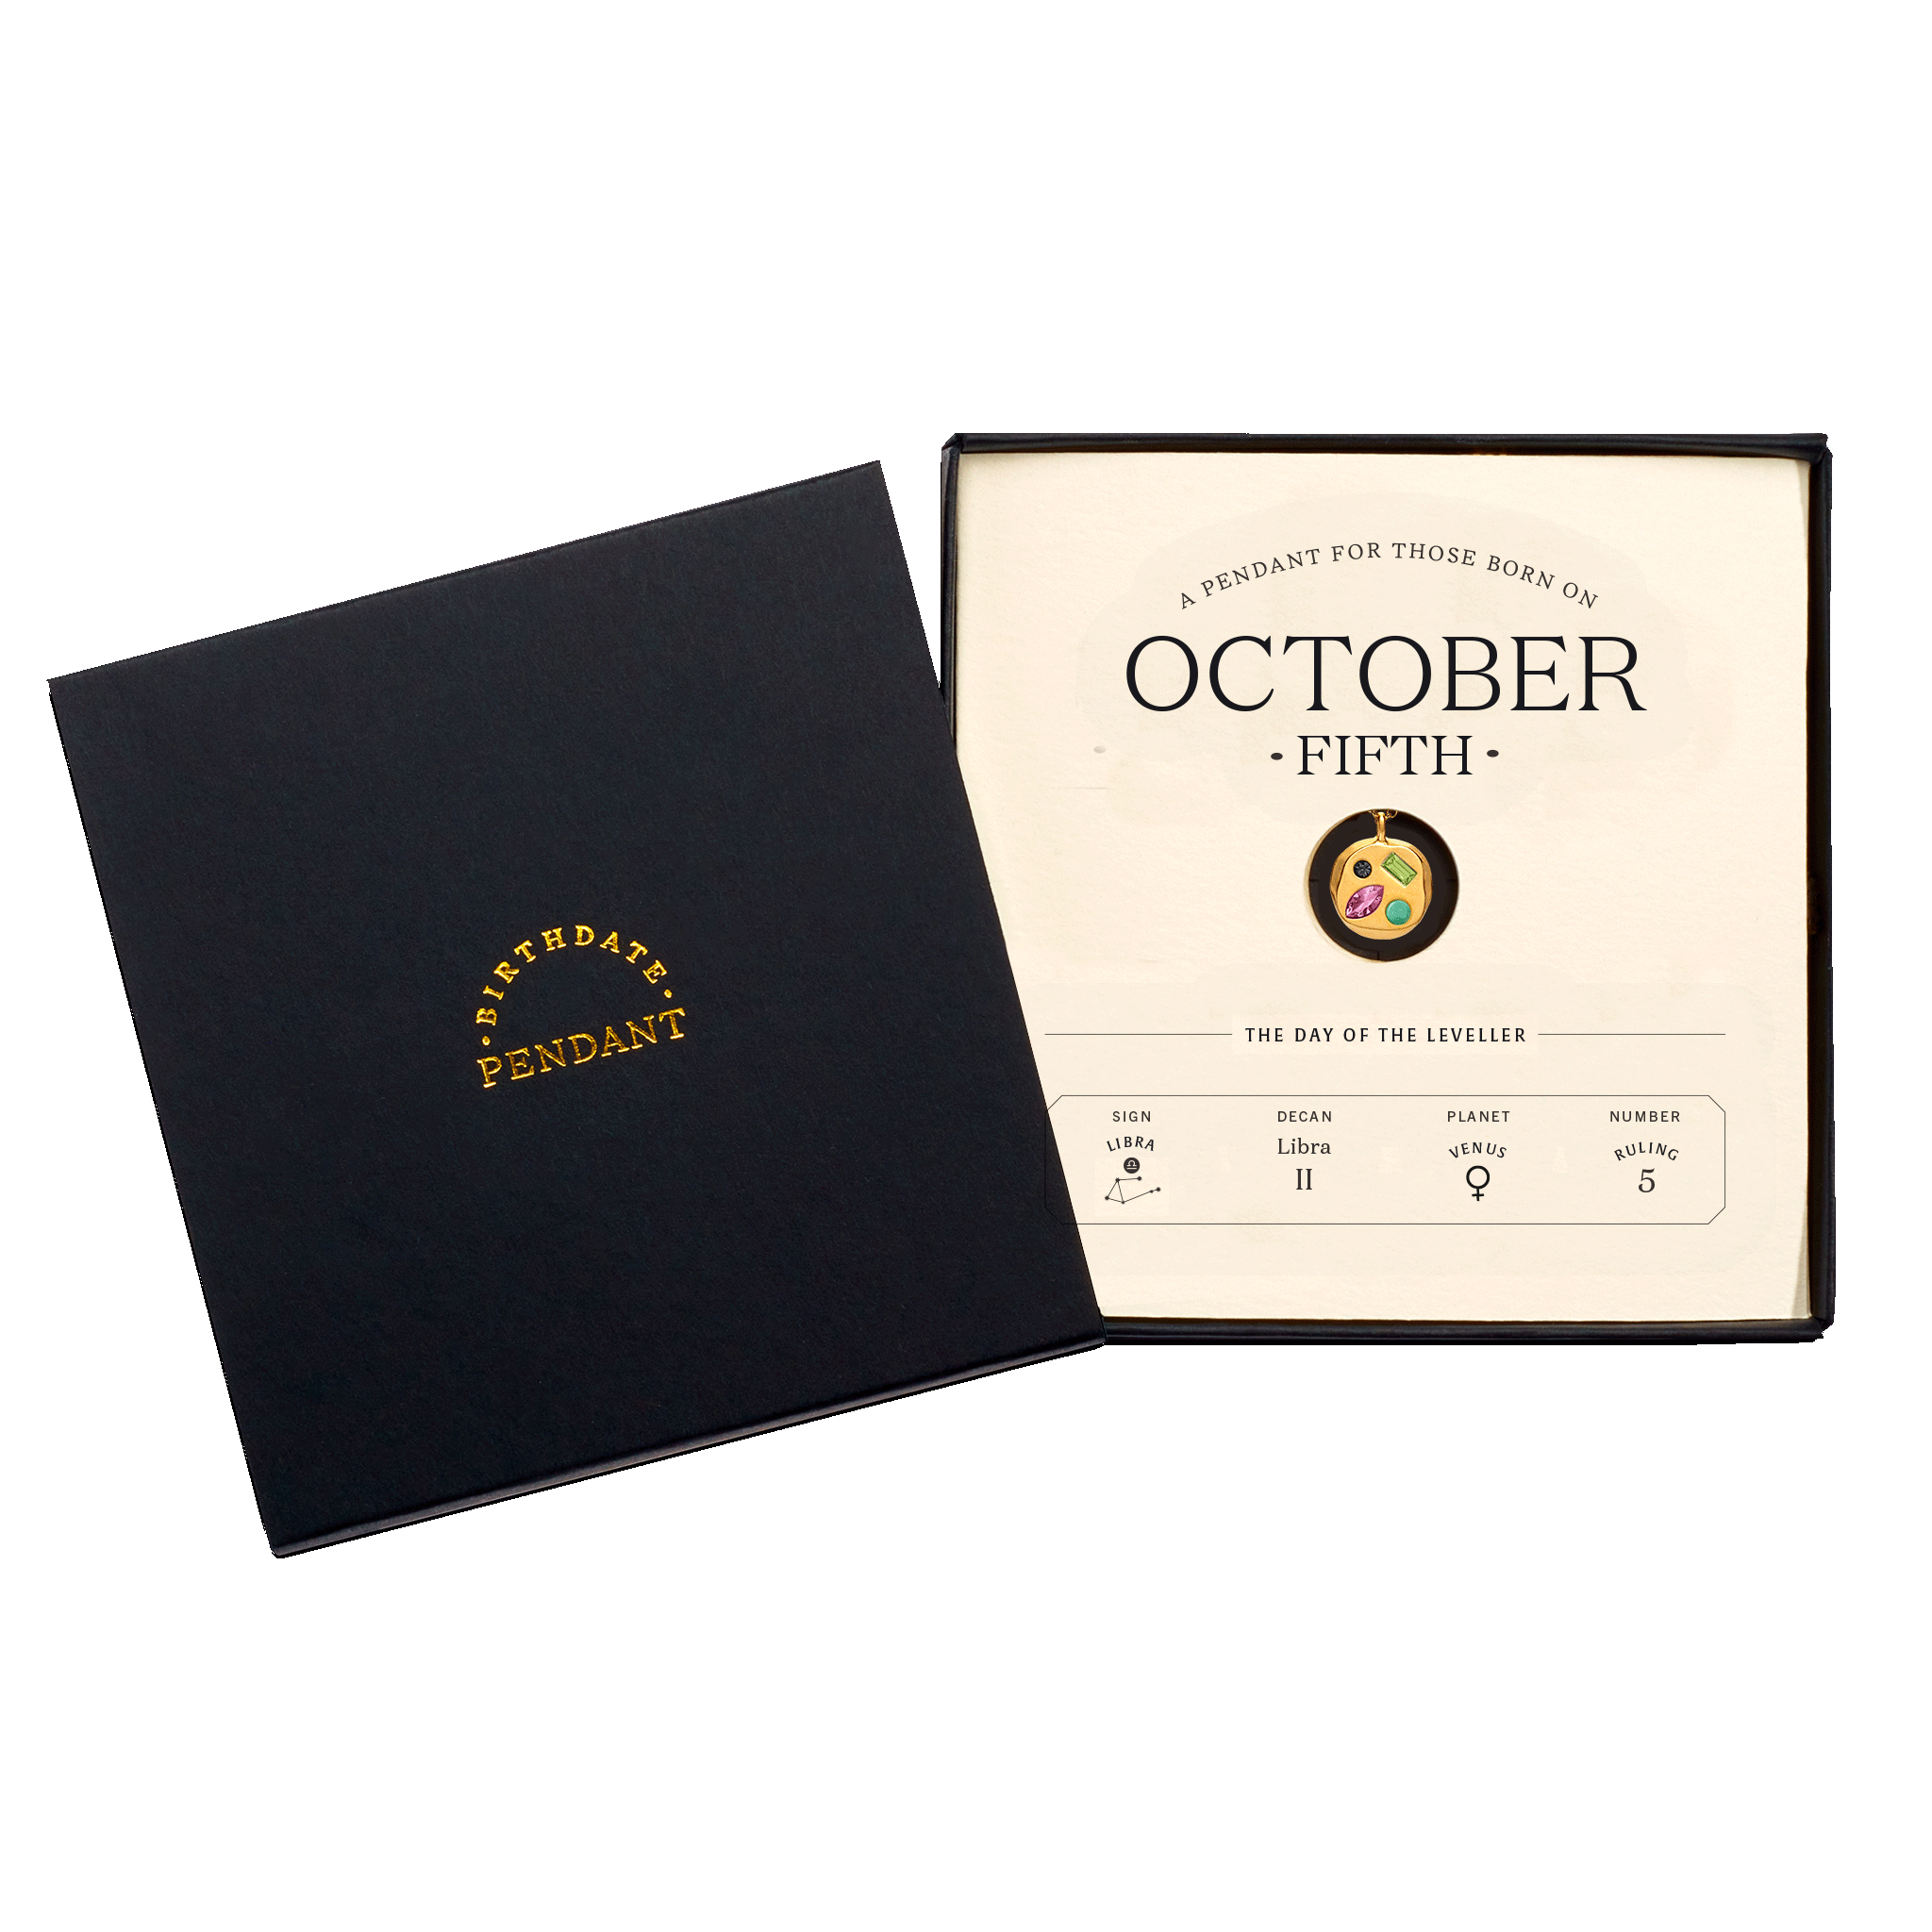 The October Fifth Pendant inside its box